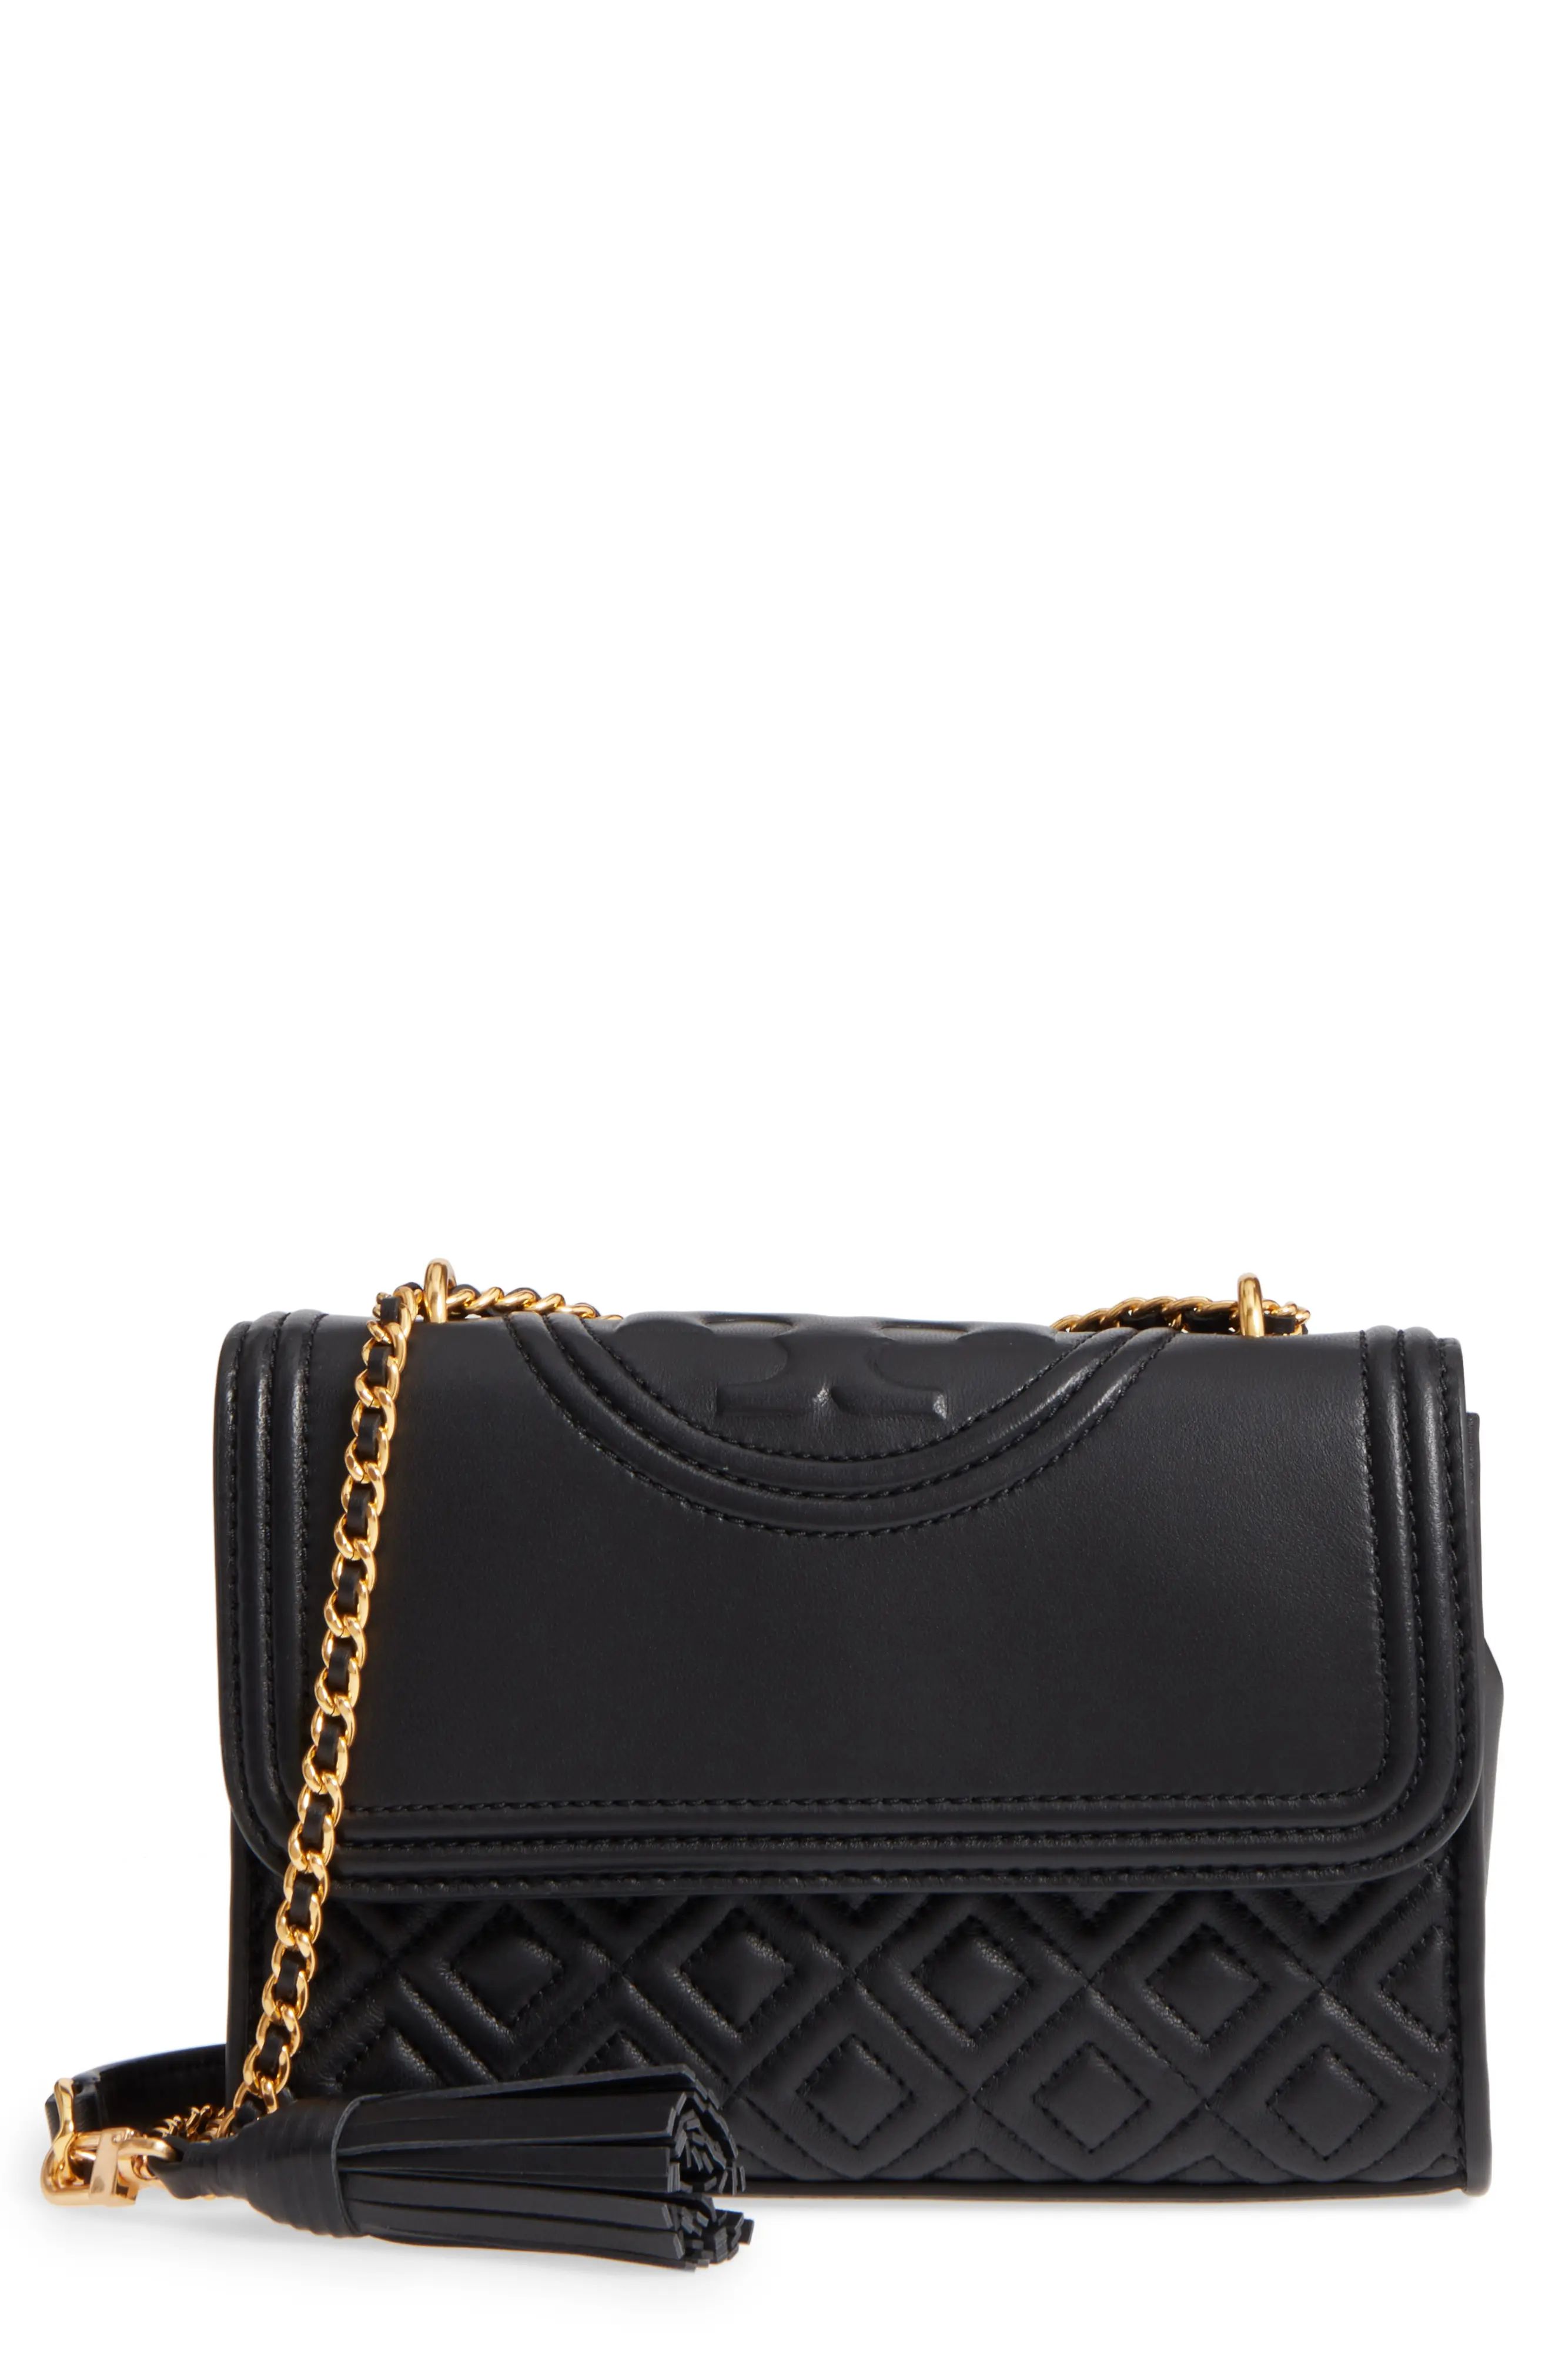 Tory Burch Small Fleming Leather Convertible Shoulder Bag | Nordstrom